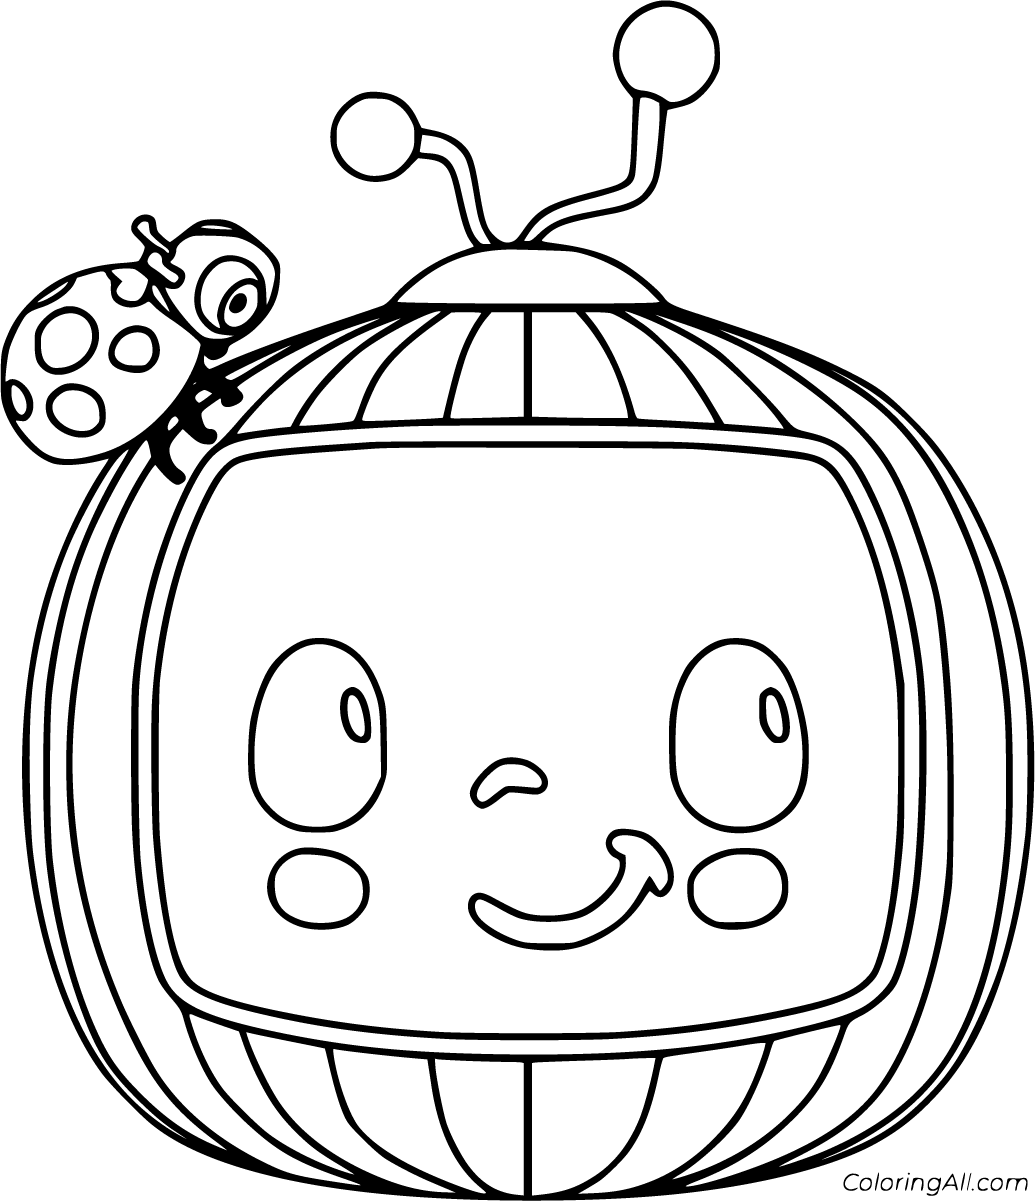 Coelon coloring pages